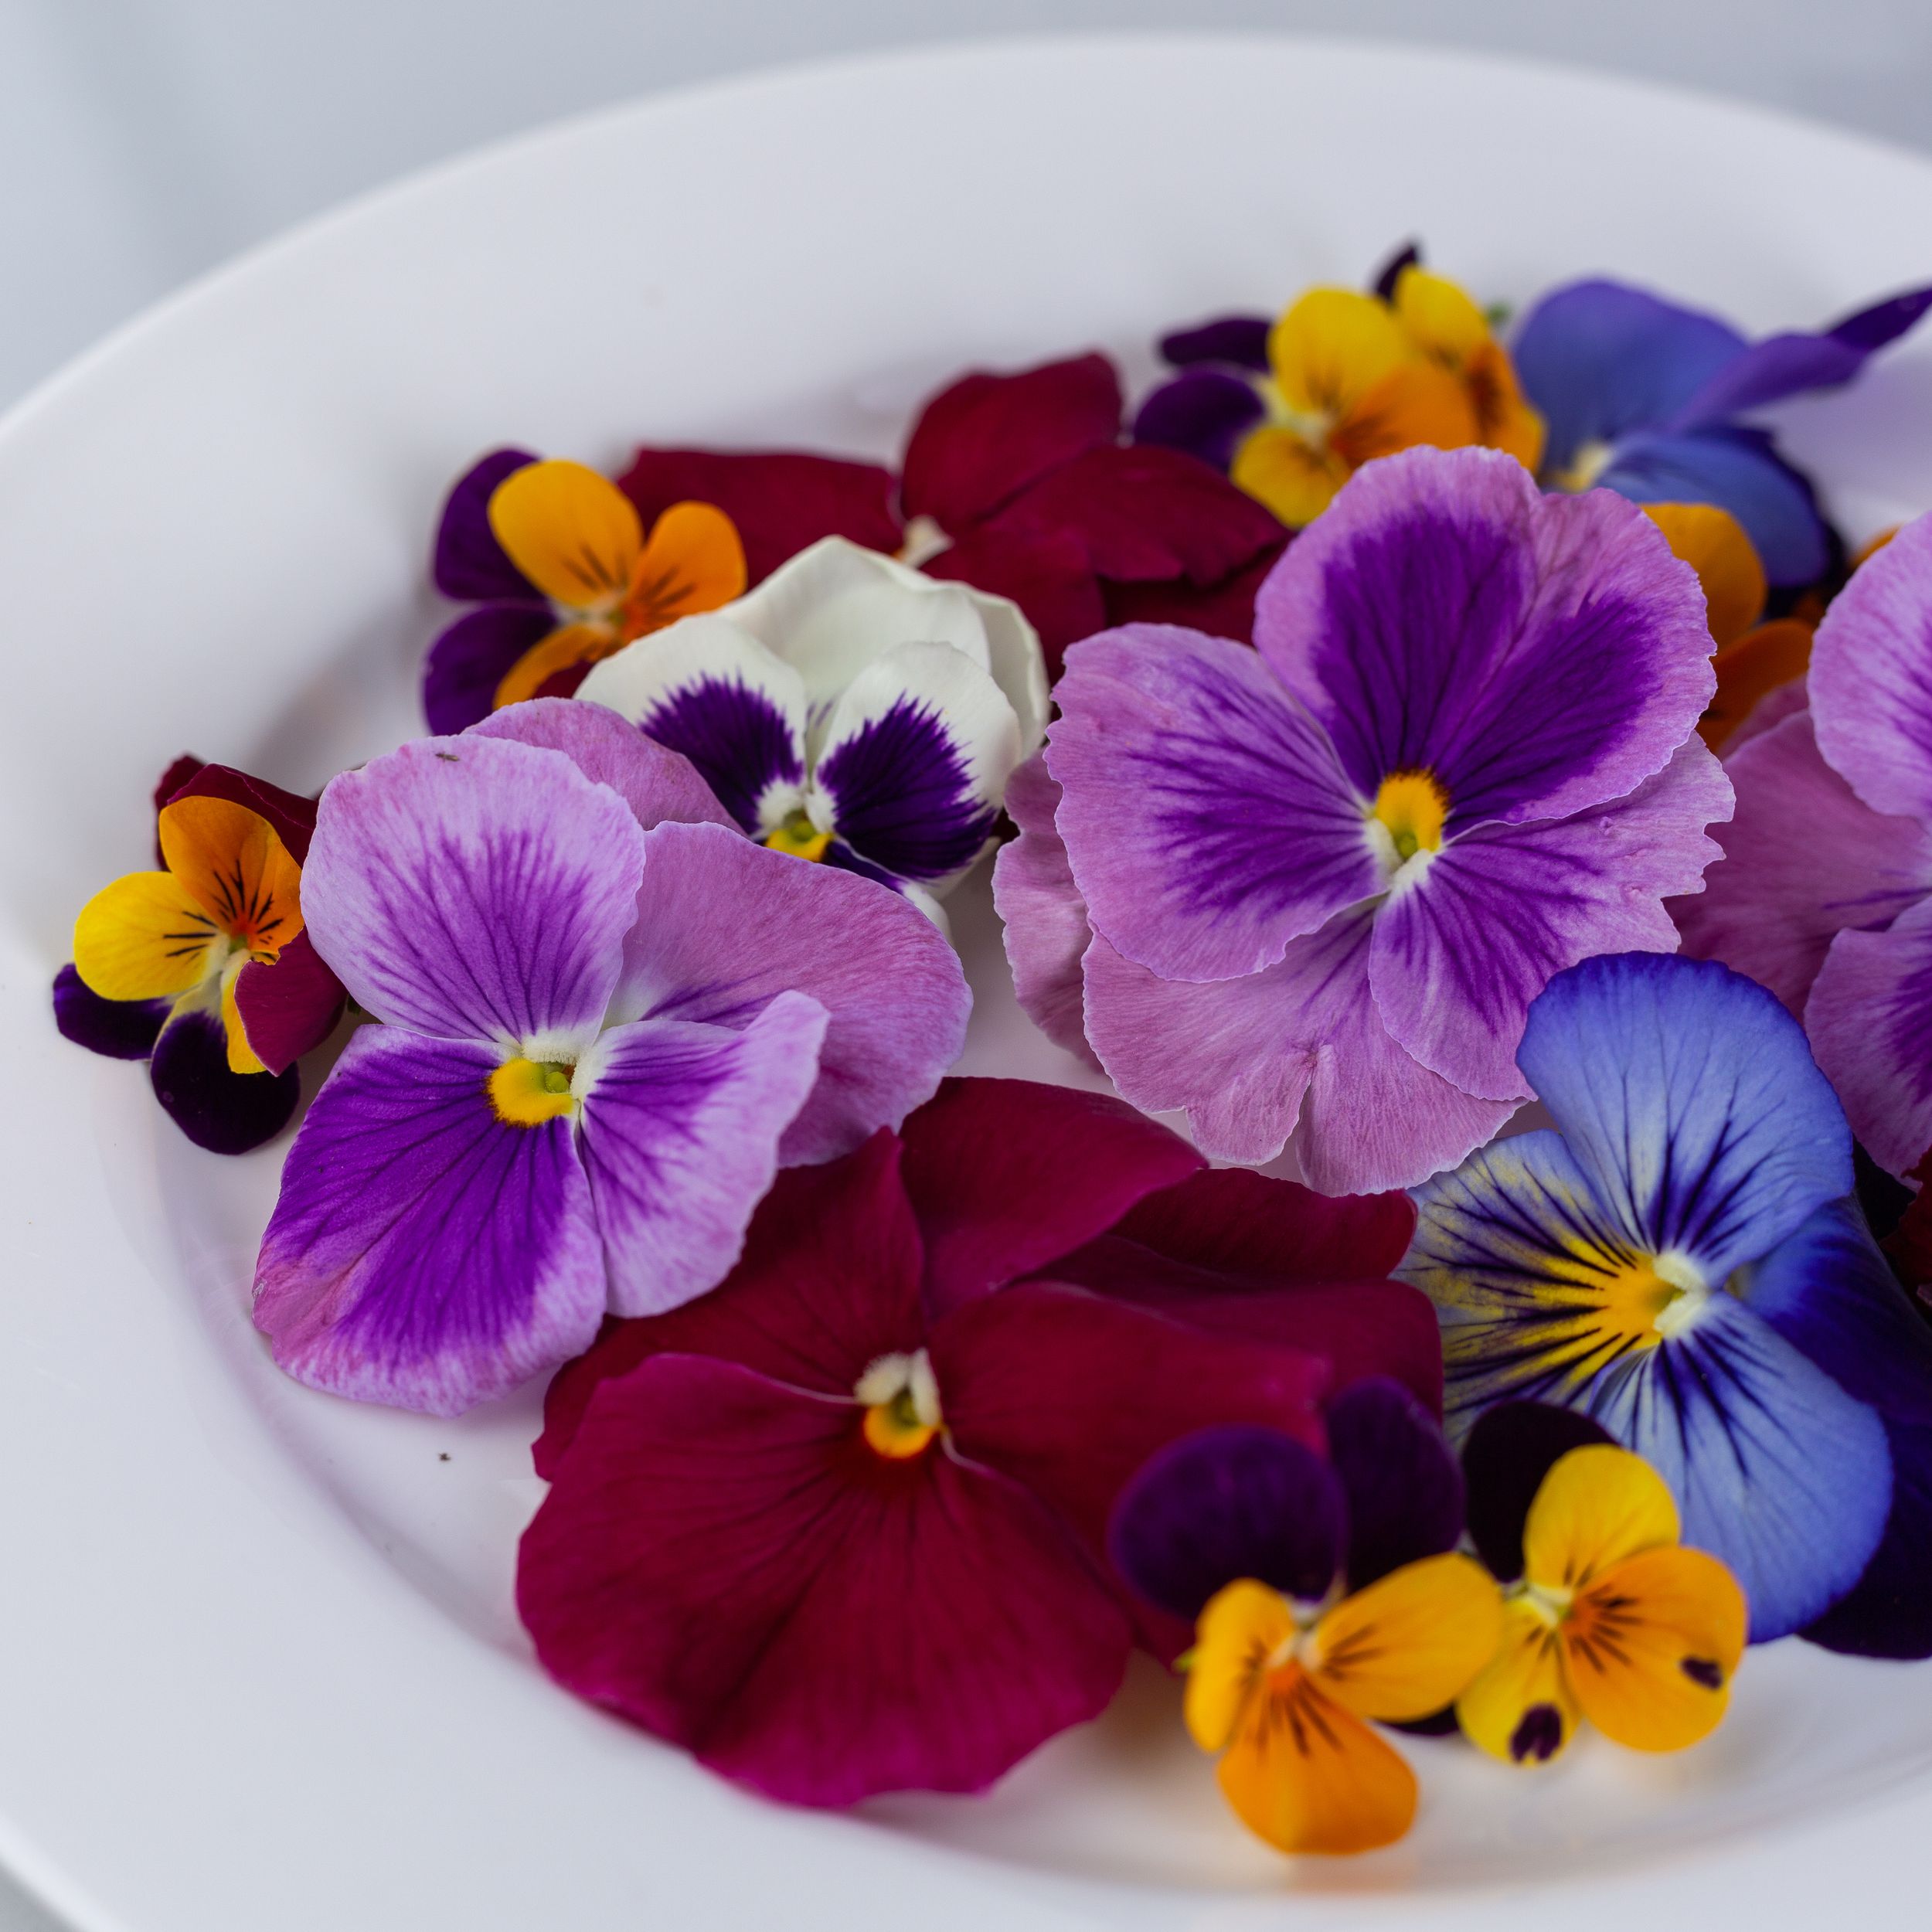 8 edible flowers that will dress up your garden - and your plate